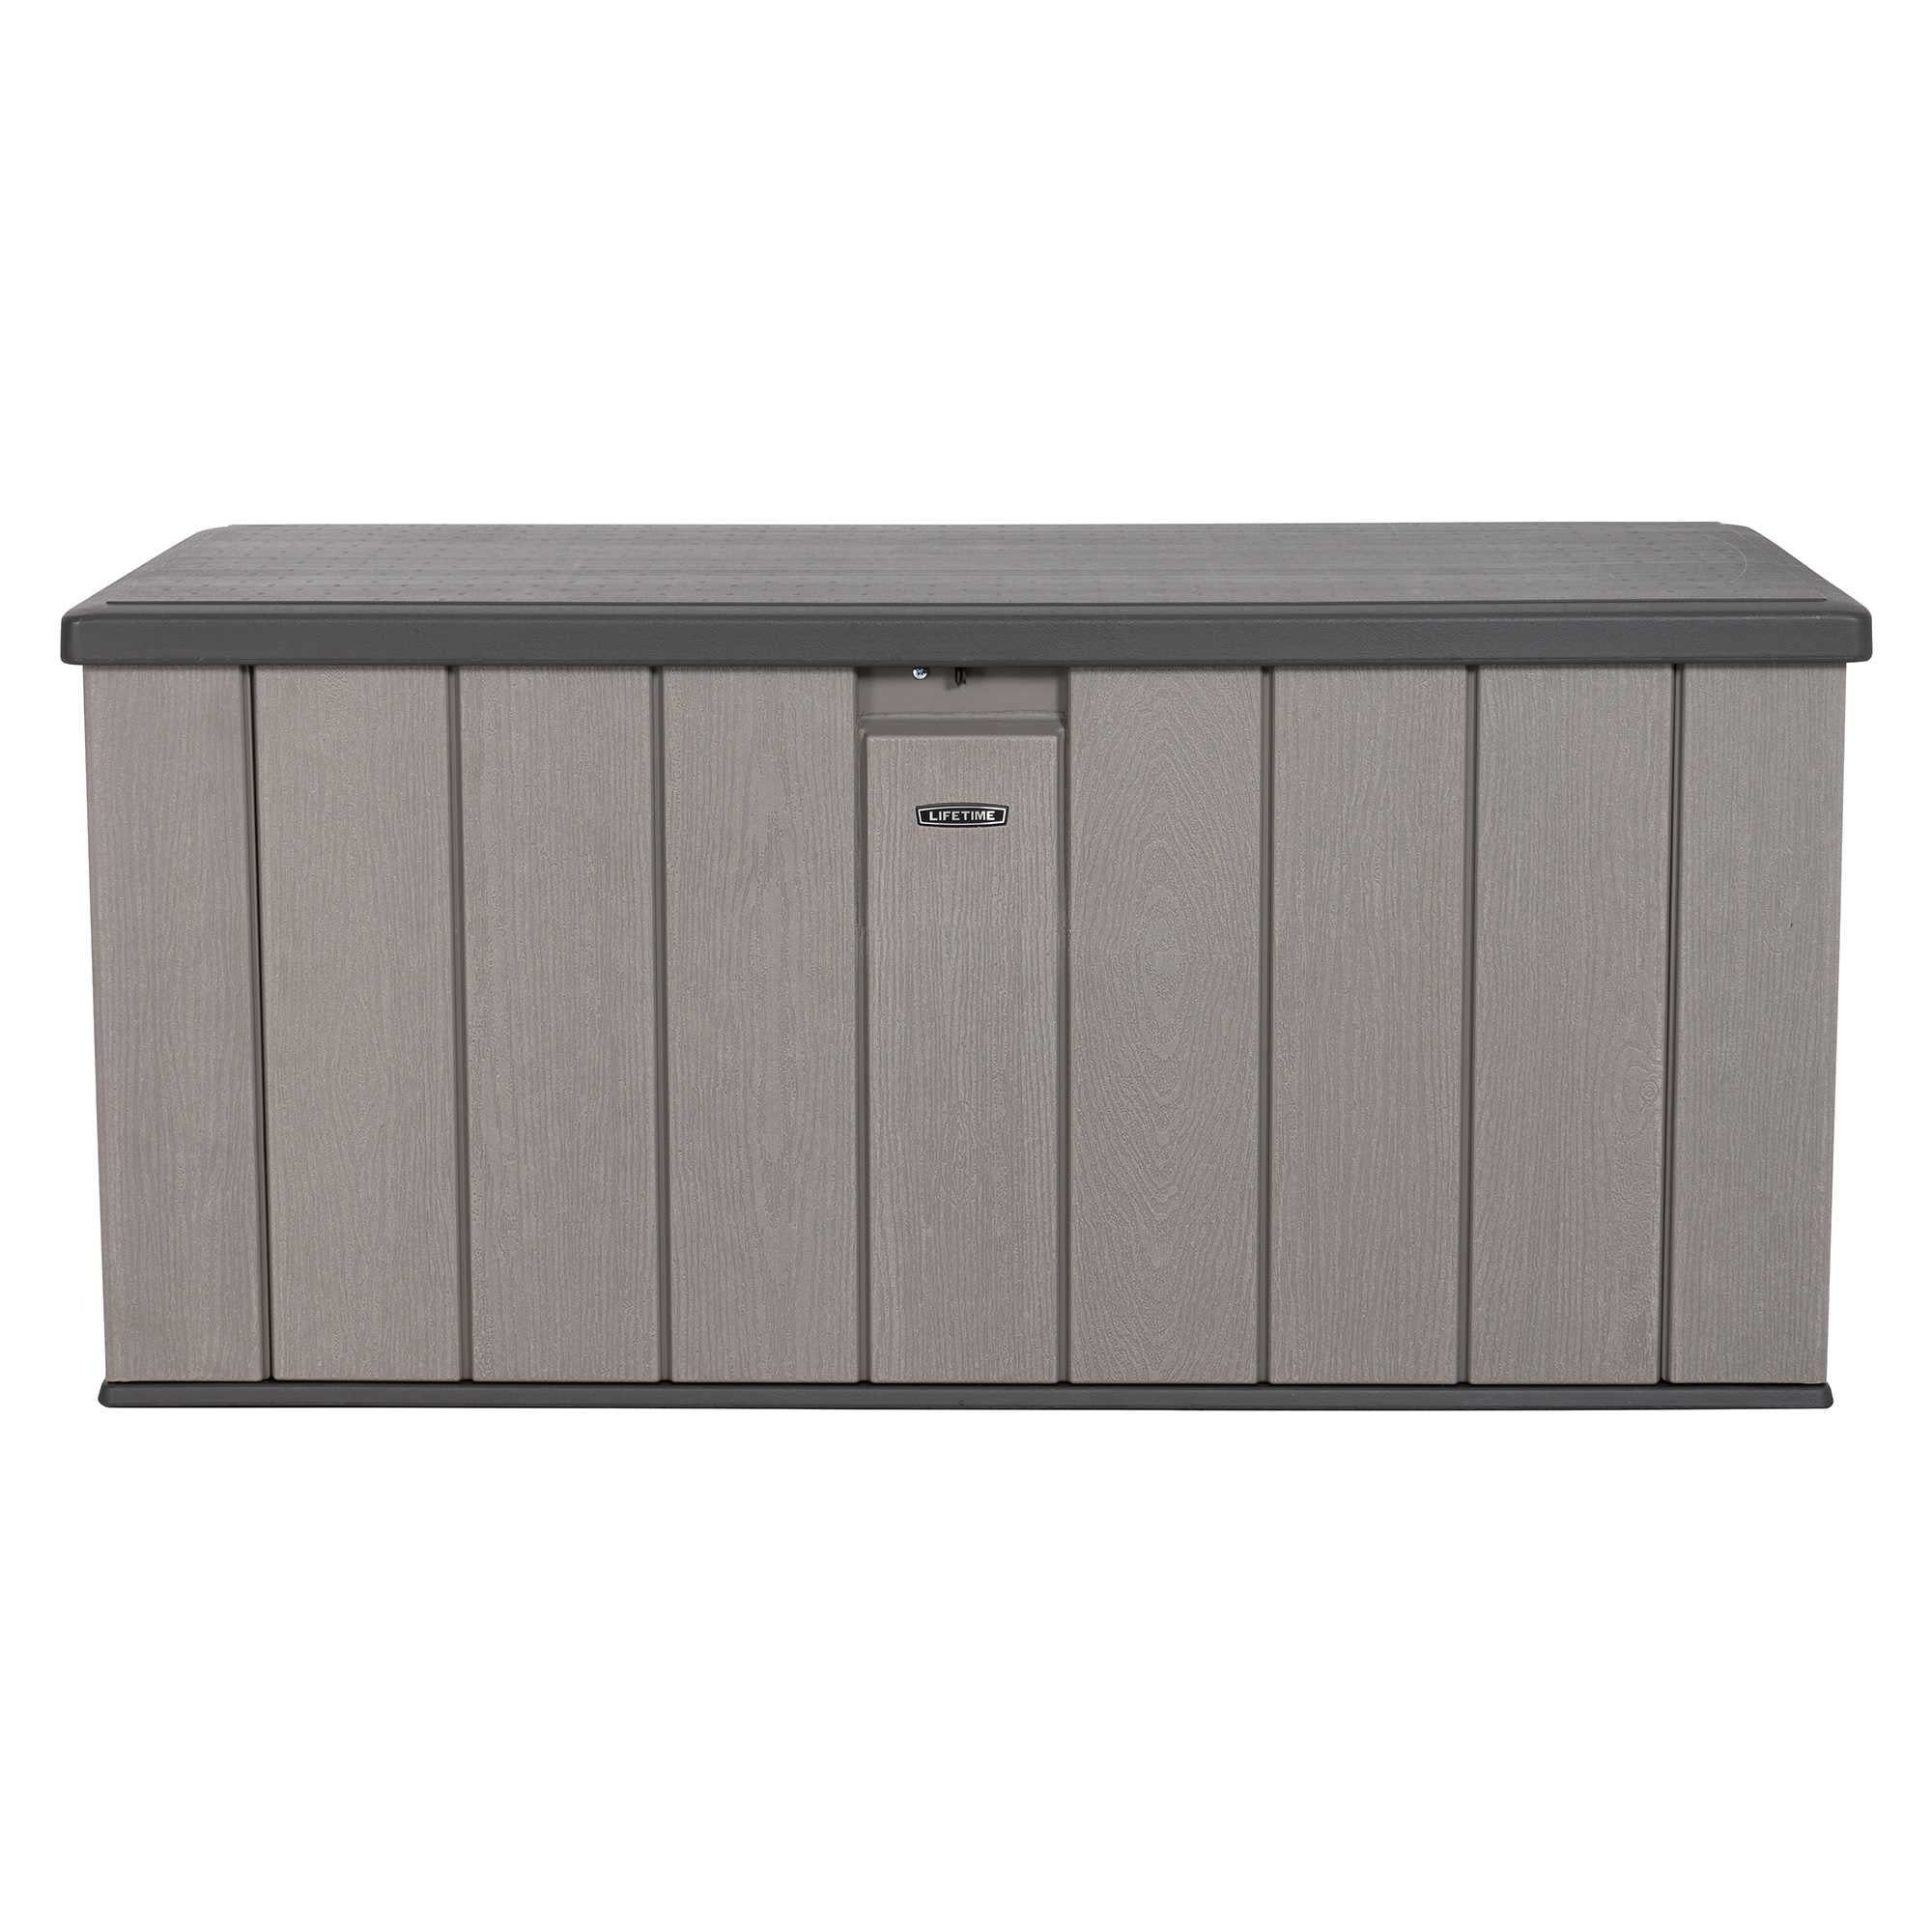 Lifetime 150 Gallon Outdoor Storage Deck Box in Storm Dust Gray - 1